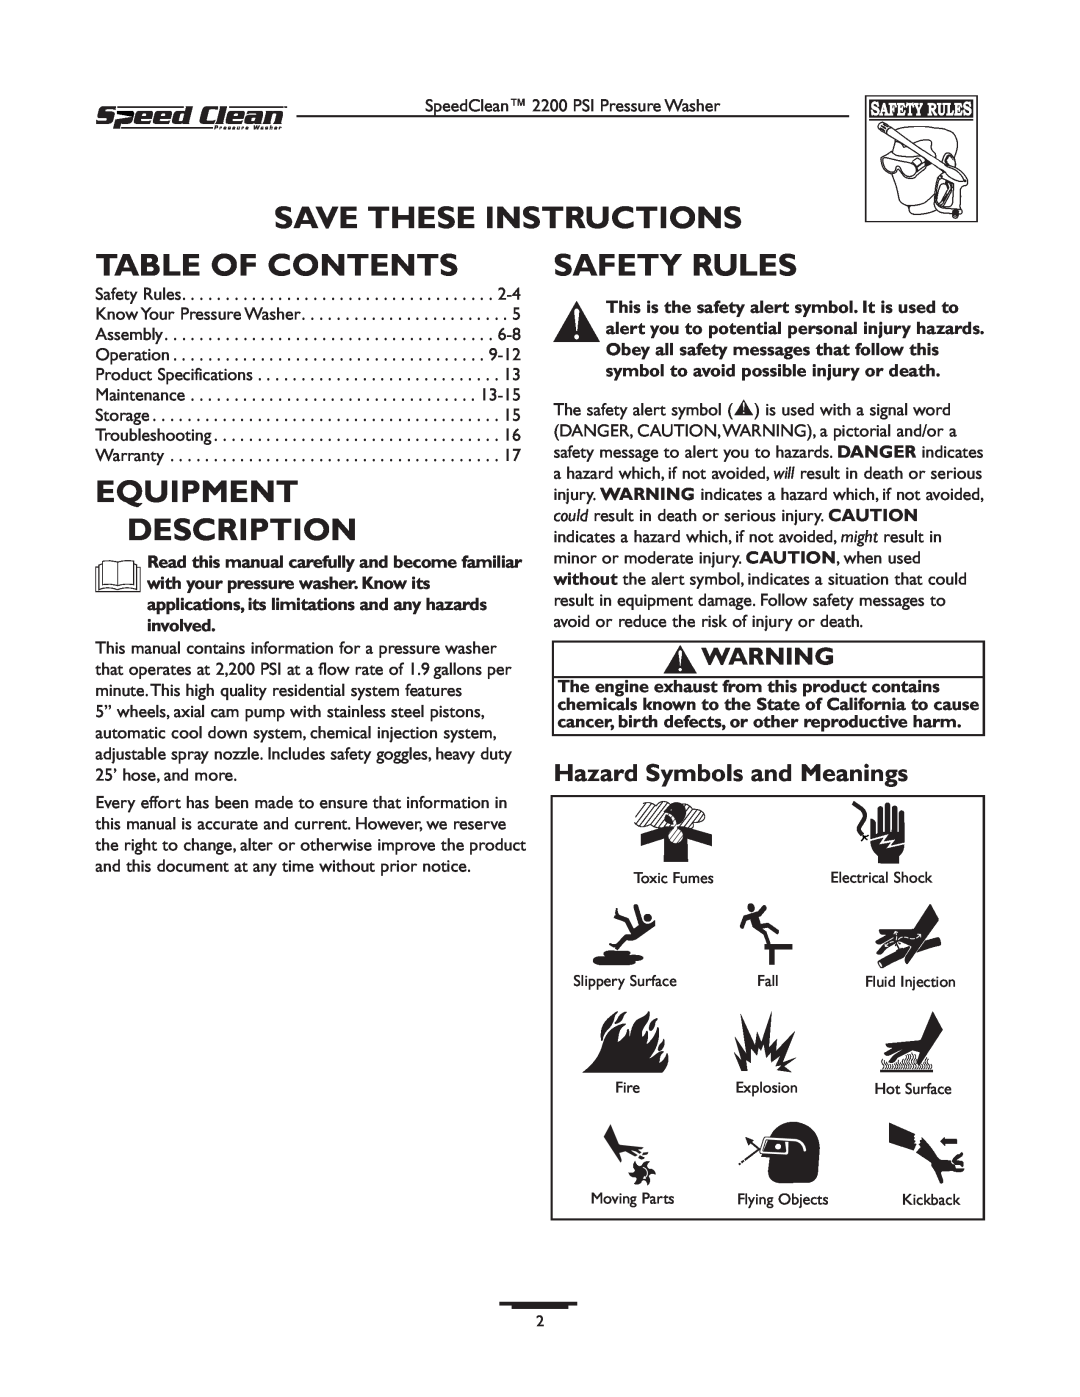 Briggs & Stratton 020239-0 owner manual Save These Instructions, Table Of Contents, Equipment Description, Safety Rules 